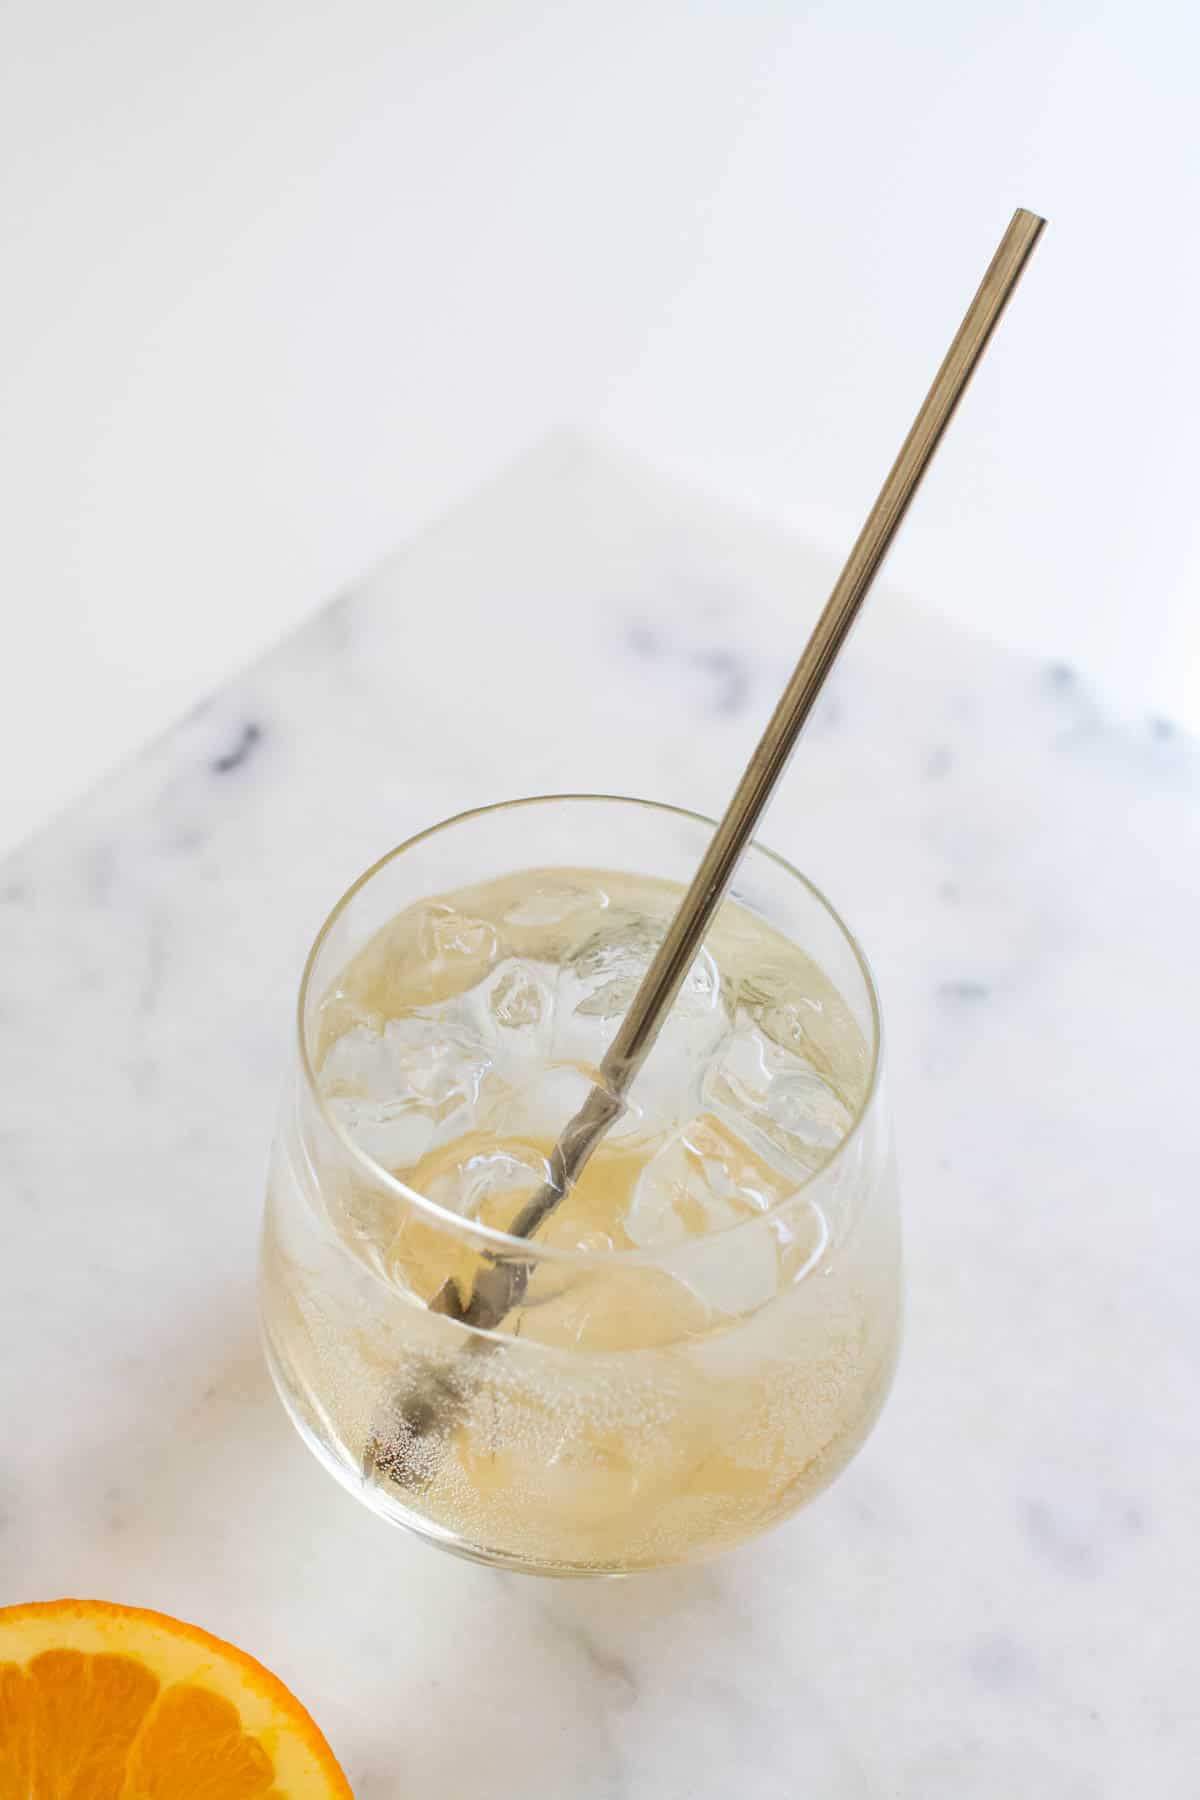 Glass of St Germain and Club Soda being stirred with a metal straw.